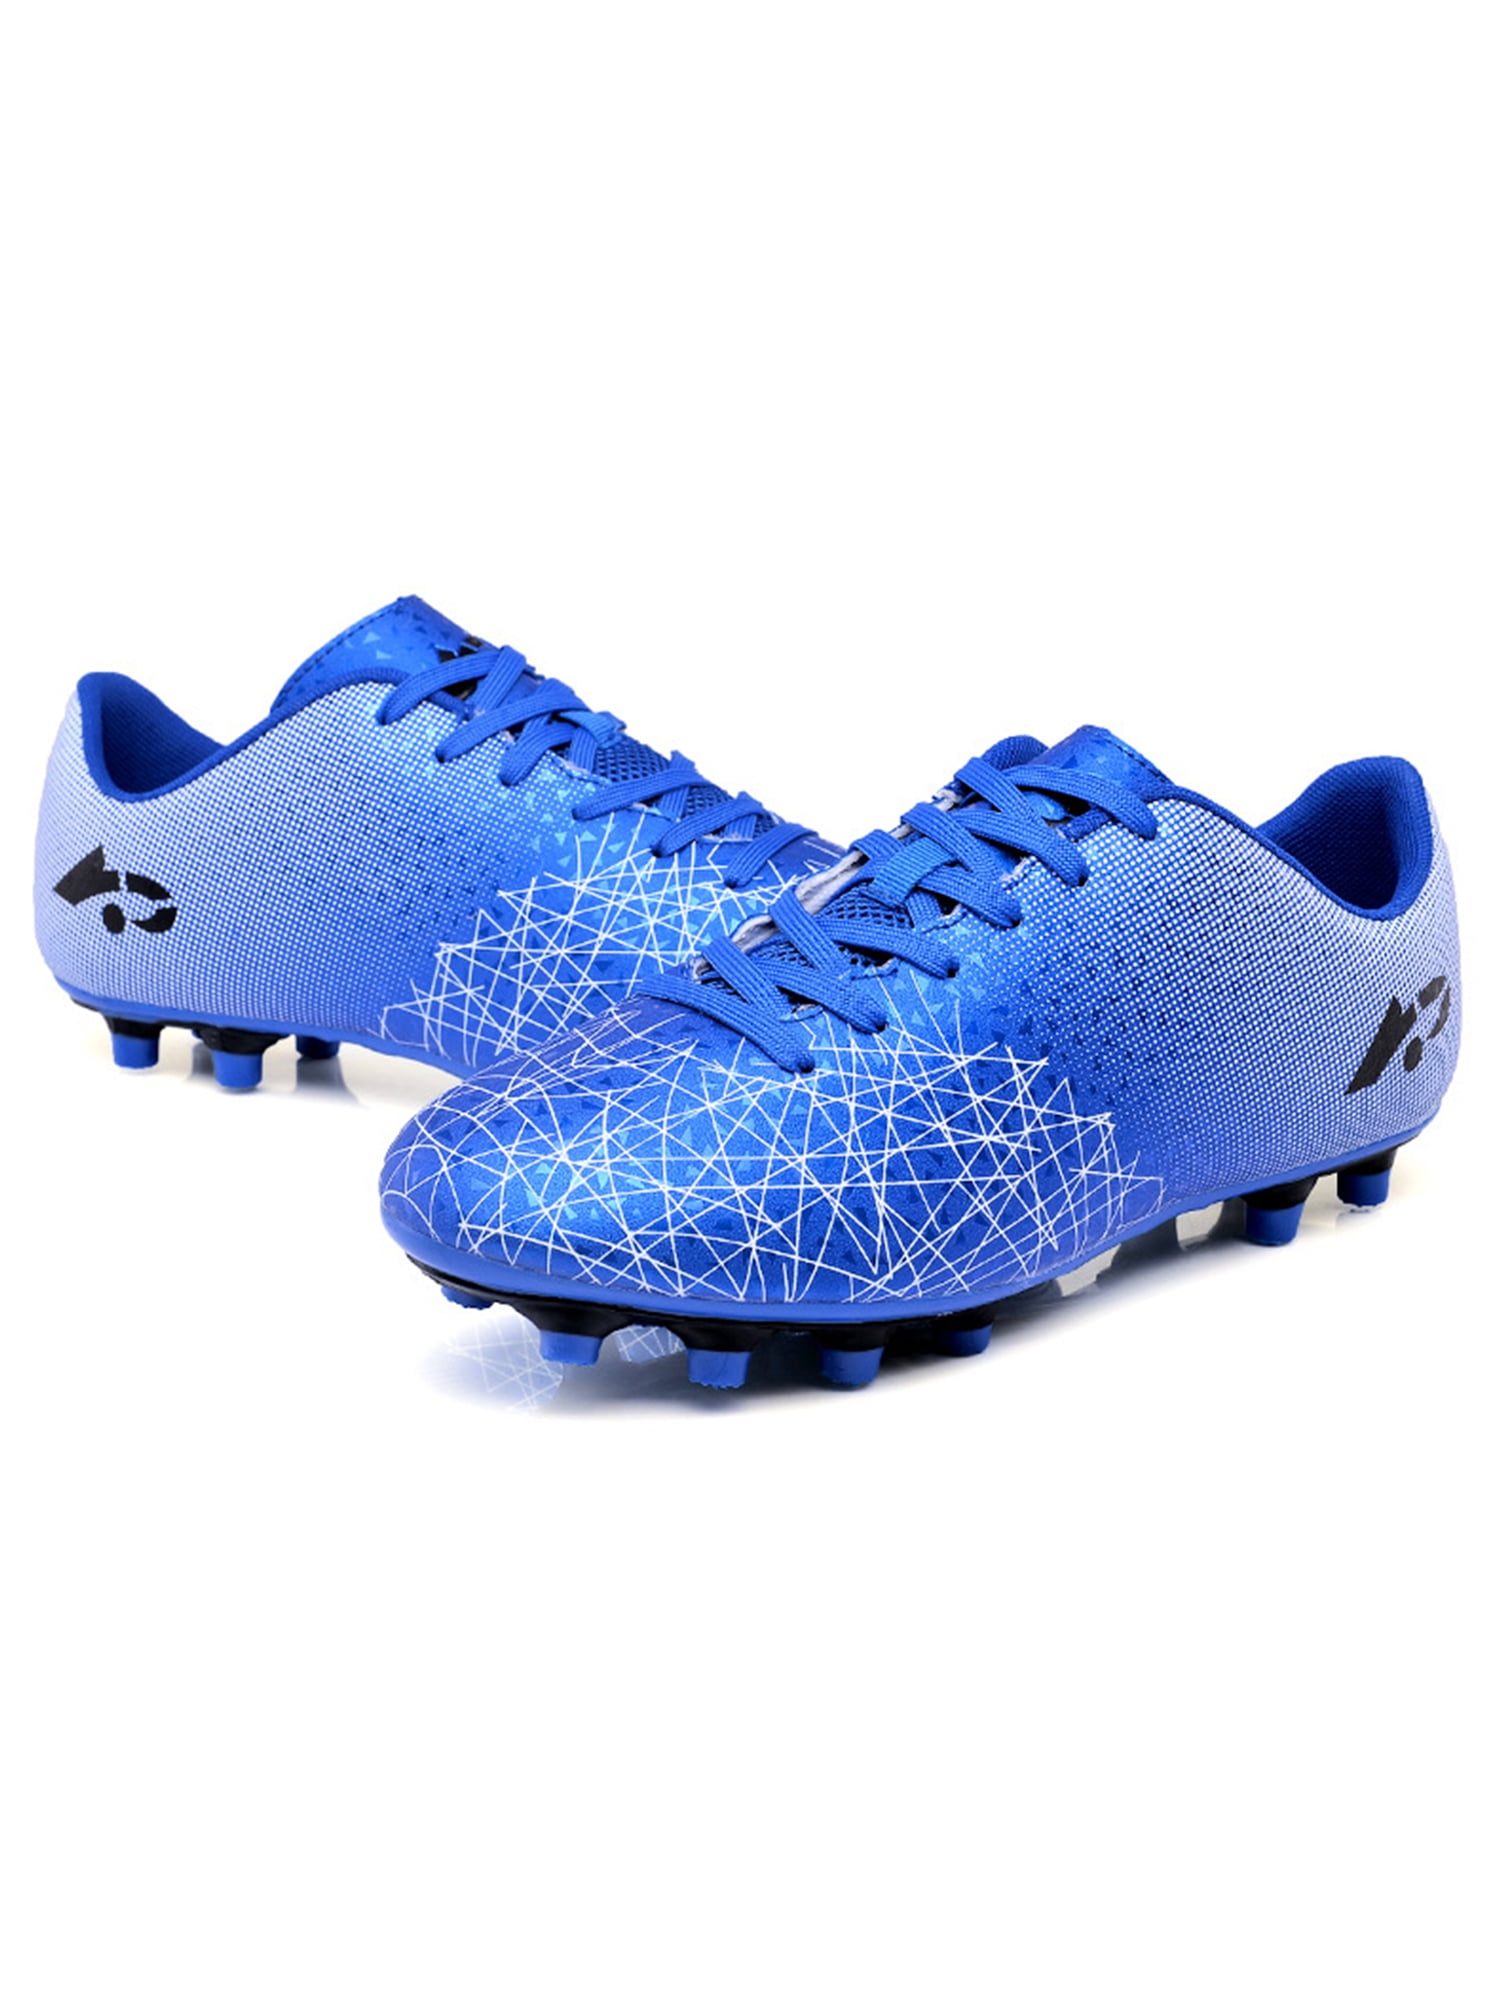 Kids Adult Soccer Shoes Youth Men Women Football Trainers Cleats Sports Sneakers 